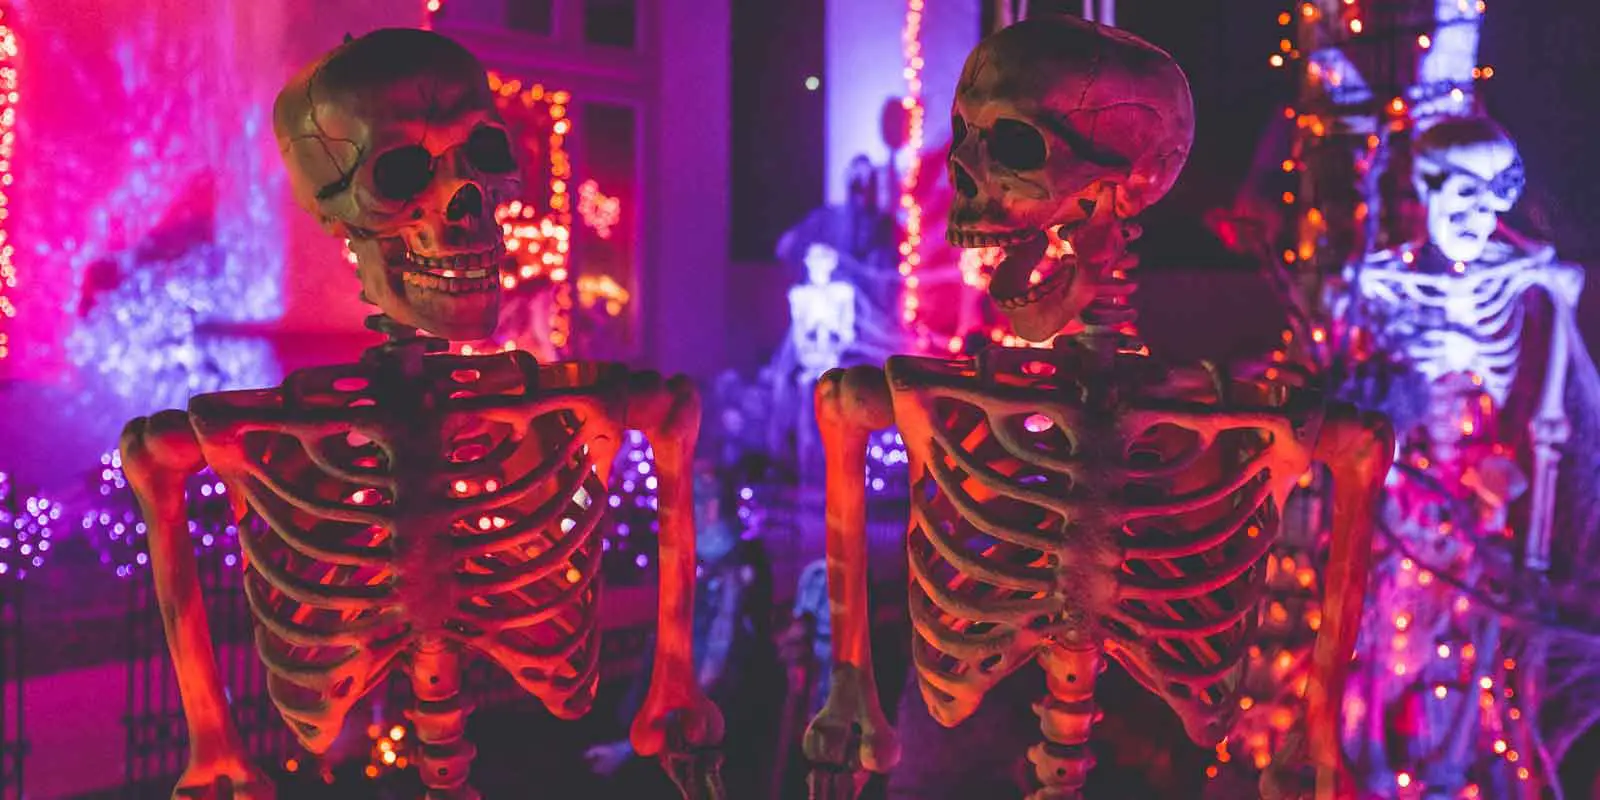 Closeup of 2 faux human skeletons posed looking at each other, with one screaming.